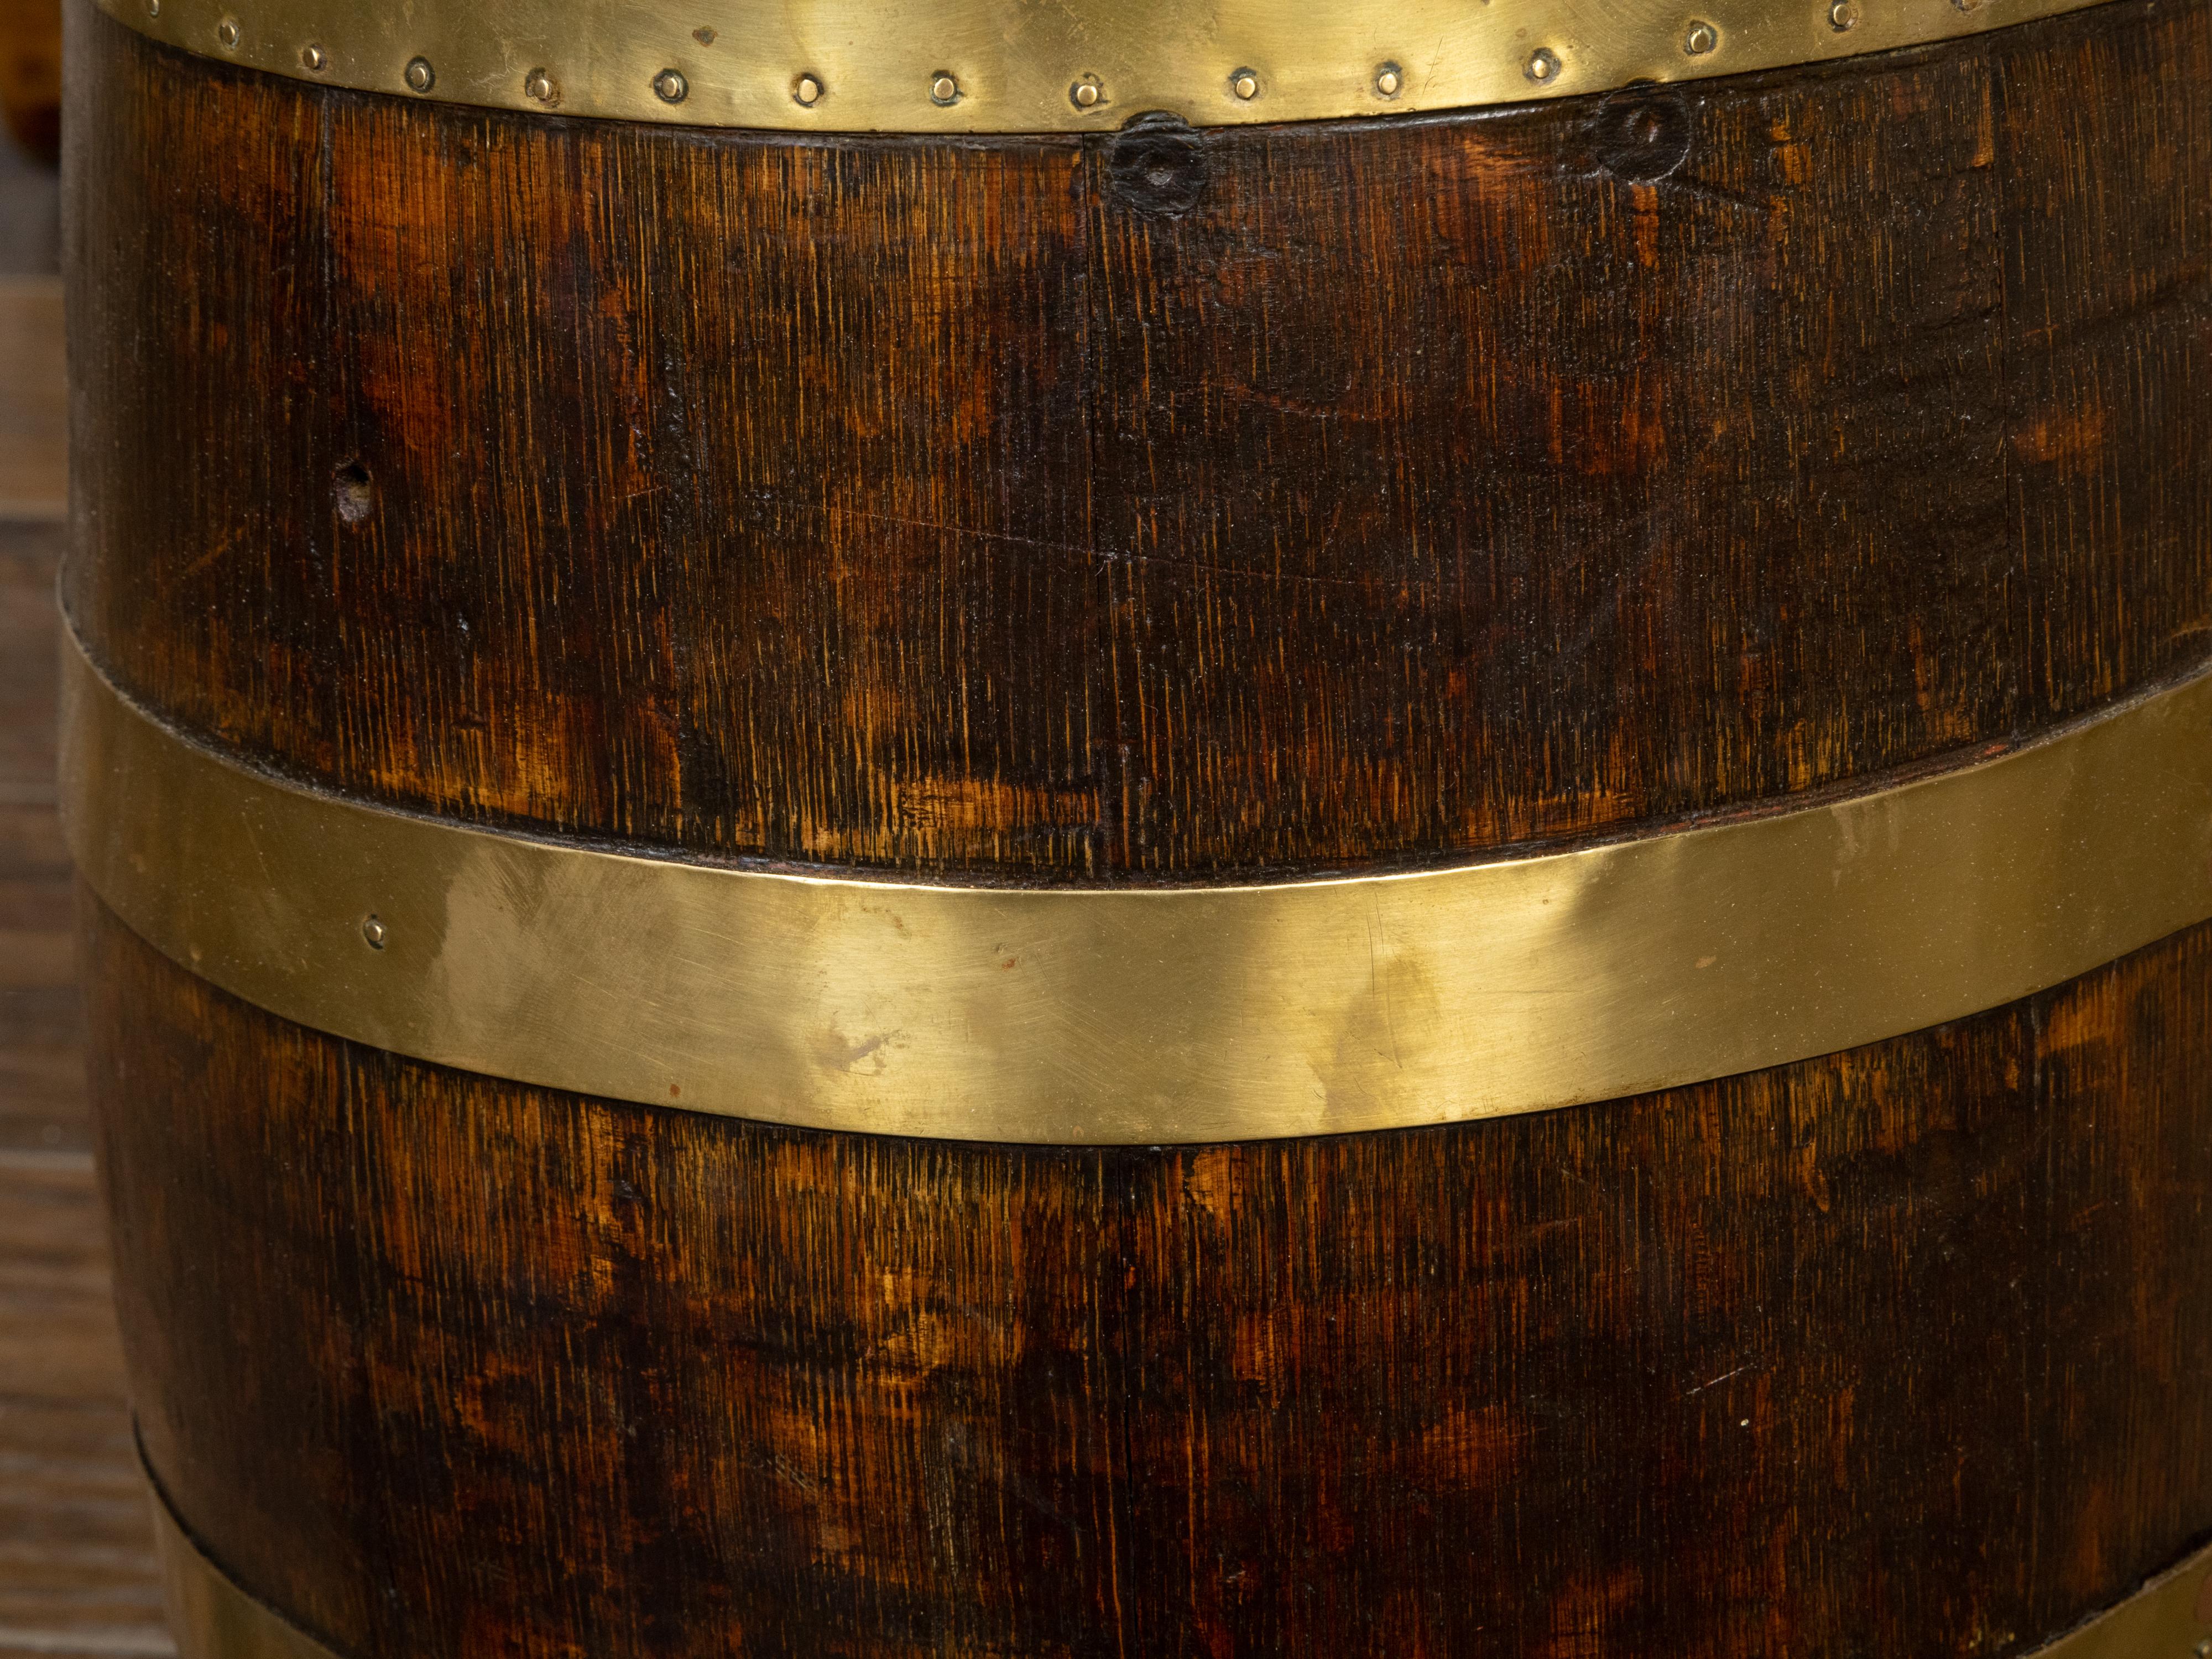 English Turn of the Century Oak Barrel with Brass Braces, circa 1900 For Sale 4